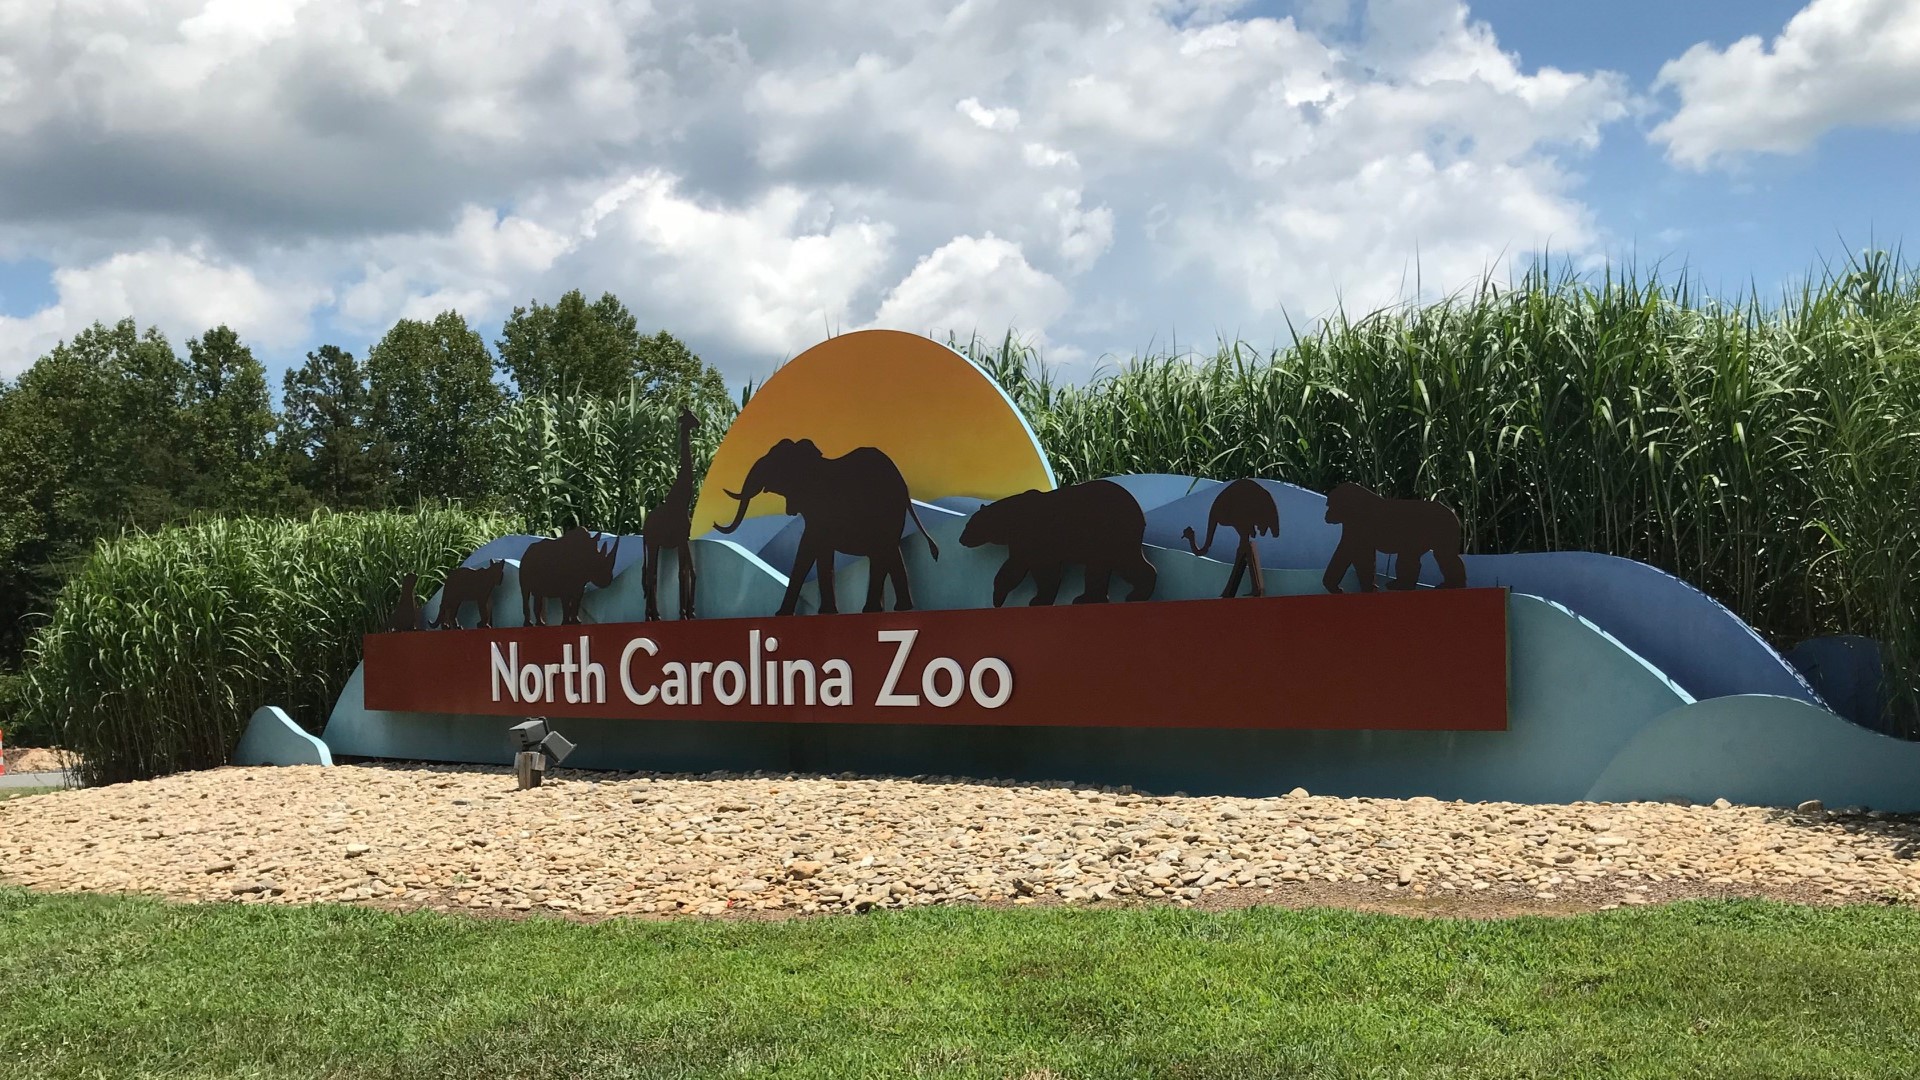 Pat Simmons, North Carolina Zoo Director gives more information about the death of a trained arborist during a rescue drill training accident.